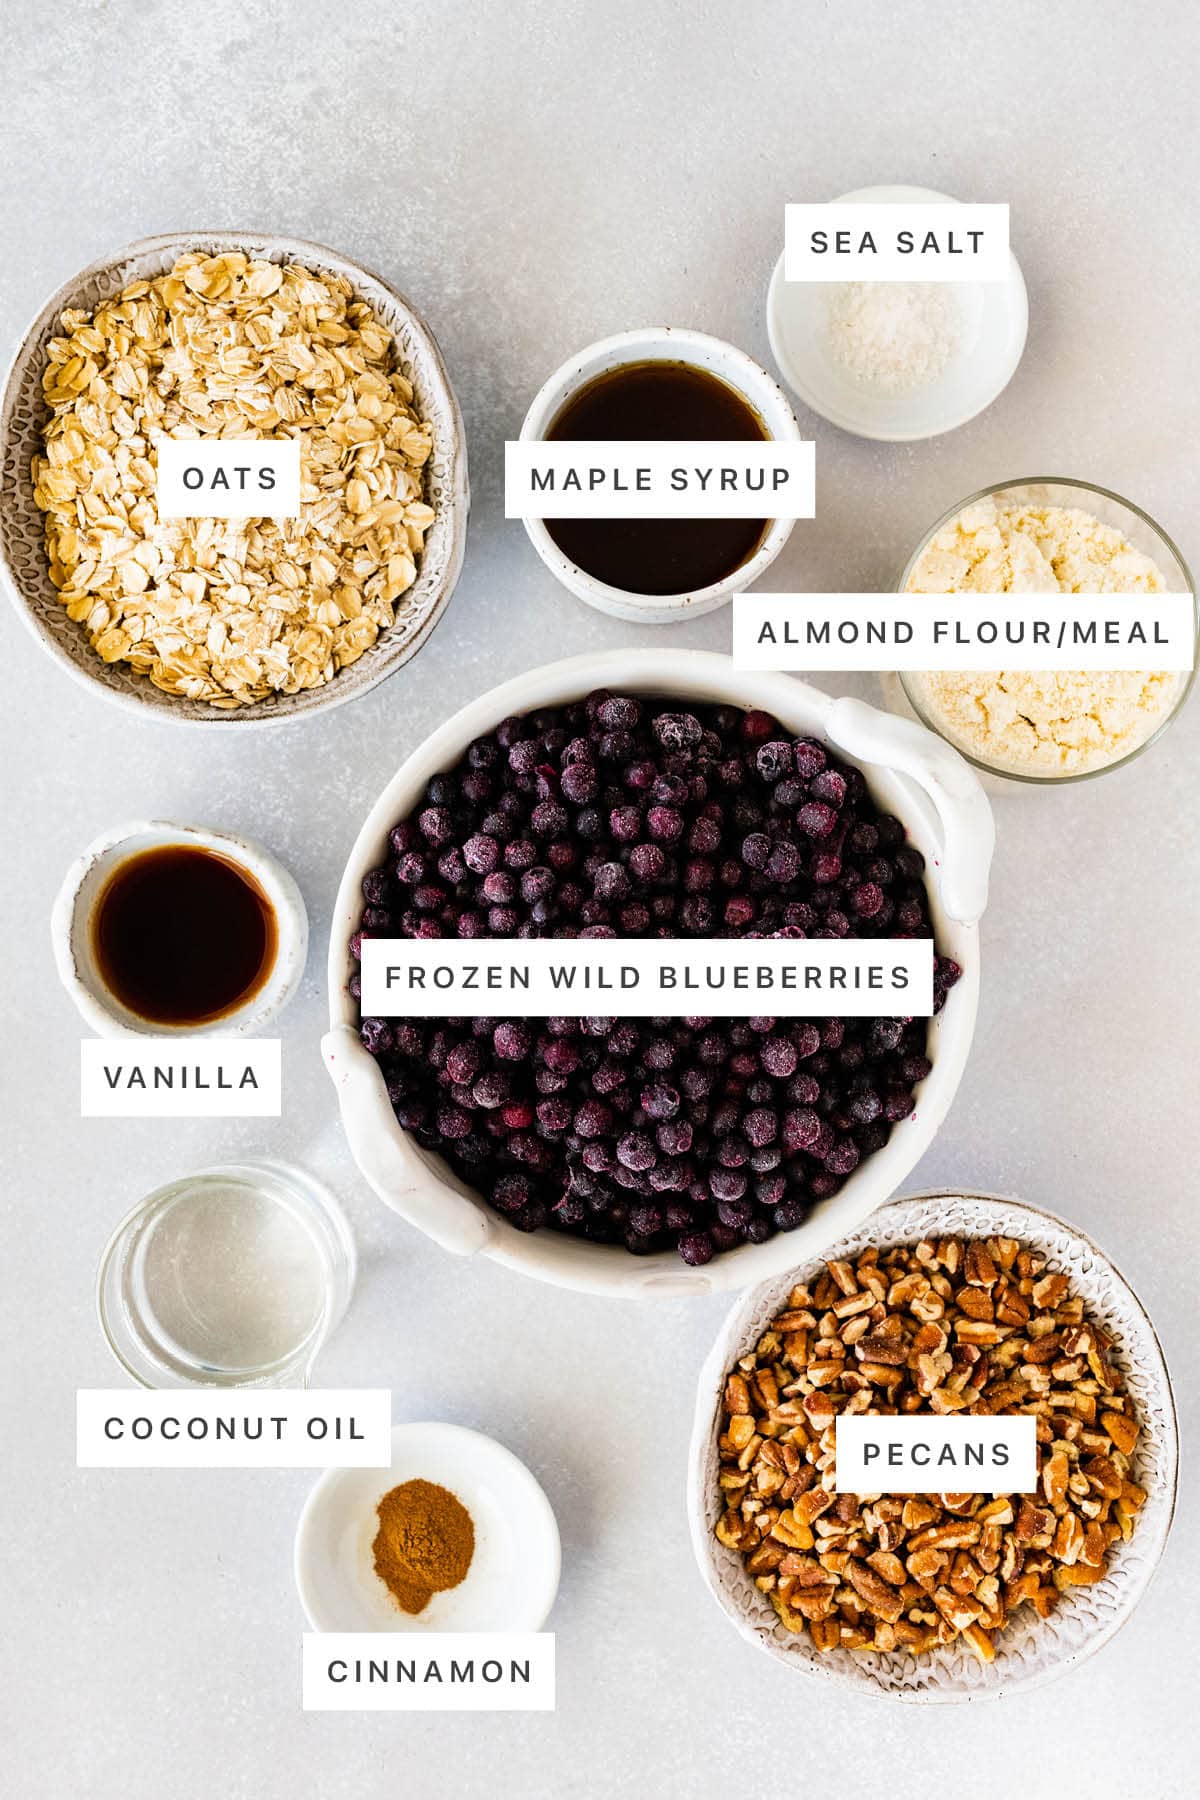 Ingredients measured out to make Healthy Blueberry Crumble: oats, maple syrup, sea salt, almond flour/meal, vanilla, frozen wild blueberries, coconut oil, cinnamon and pecans.